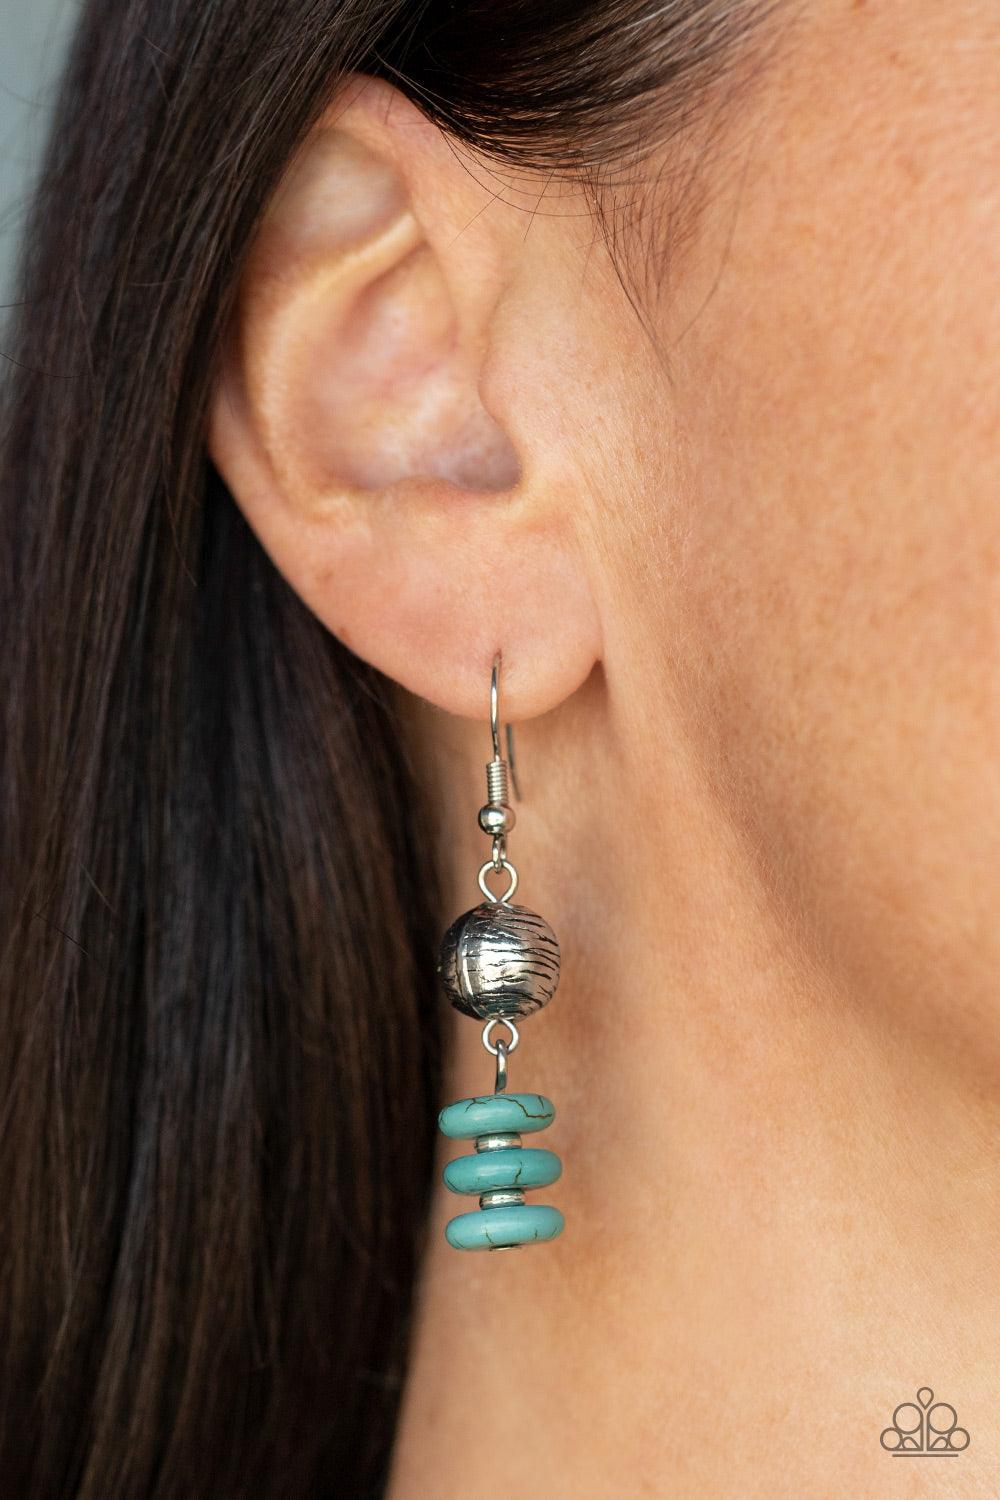 Paparazzi Accessories Oasis Goddess - Blue Infused with dainty silver accents, mismatched silver beads and turquoise stone discs are threaded along an invisible wire below the collar. An oversized turquoise stone pendant swings from the center of the eart